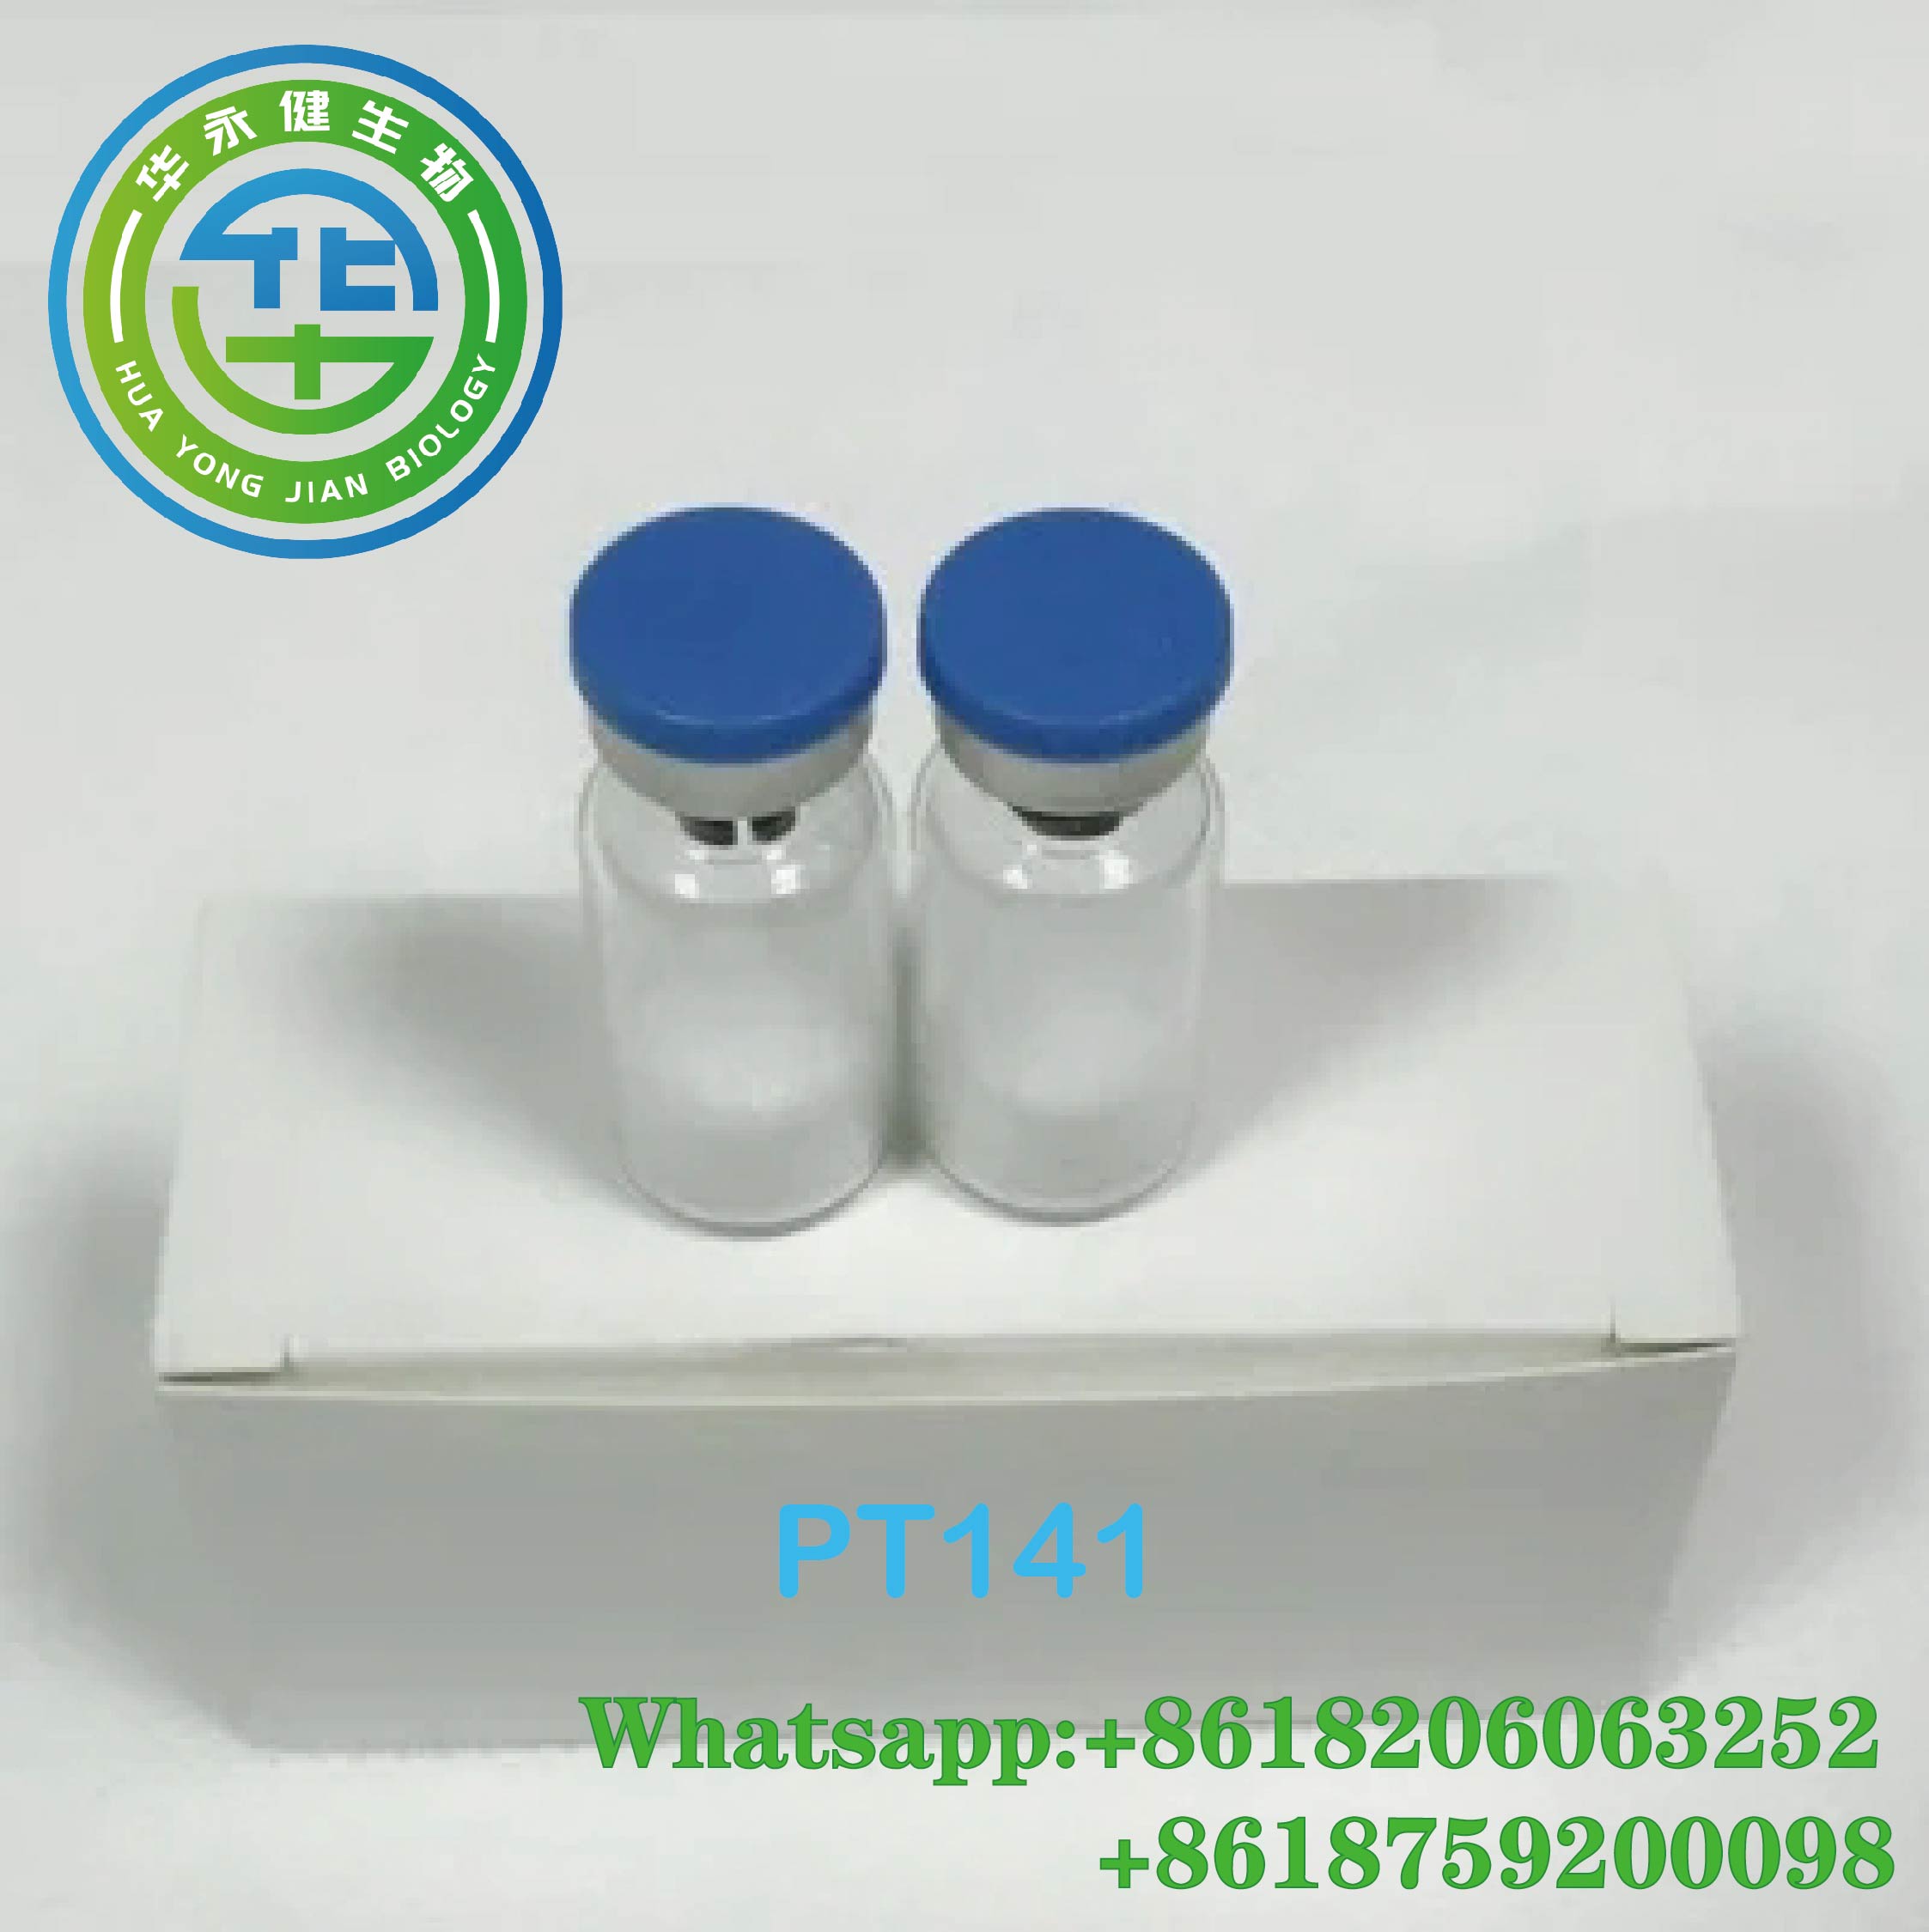 Steroids Hormone Raw Powder Muscle Building Best Quality PT141 Peptides America Shipping Guaranteed